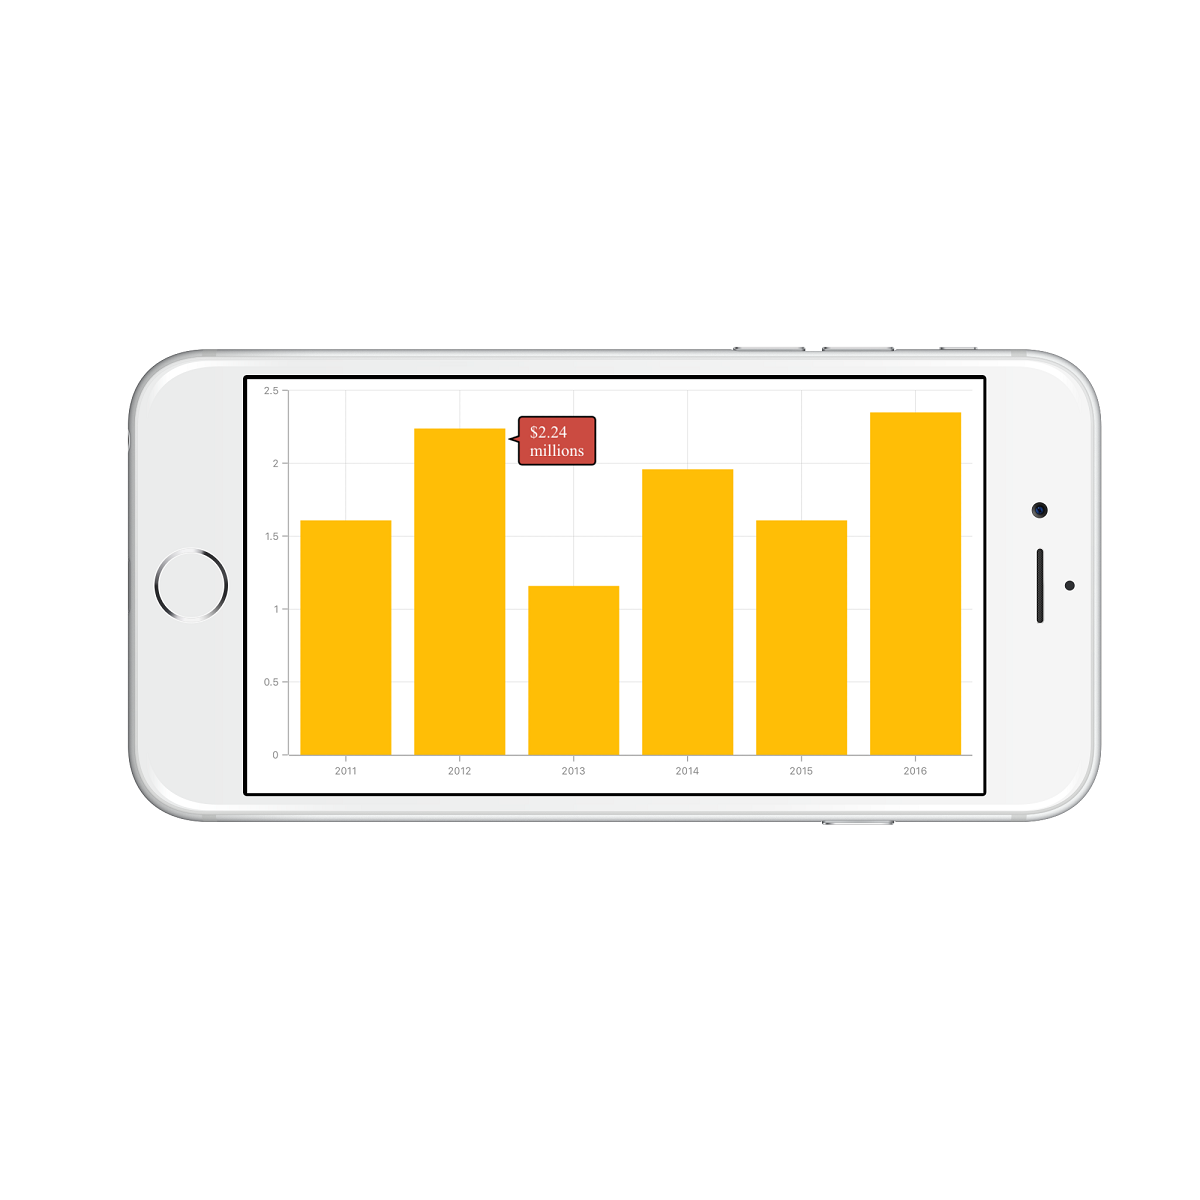 Customizing the appearance of tooltip in Xamarin.iOS Chart